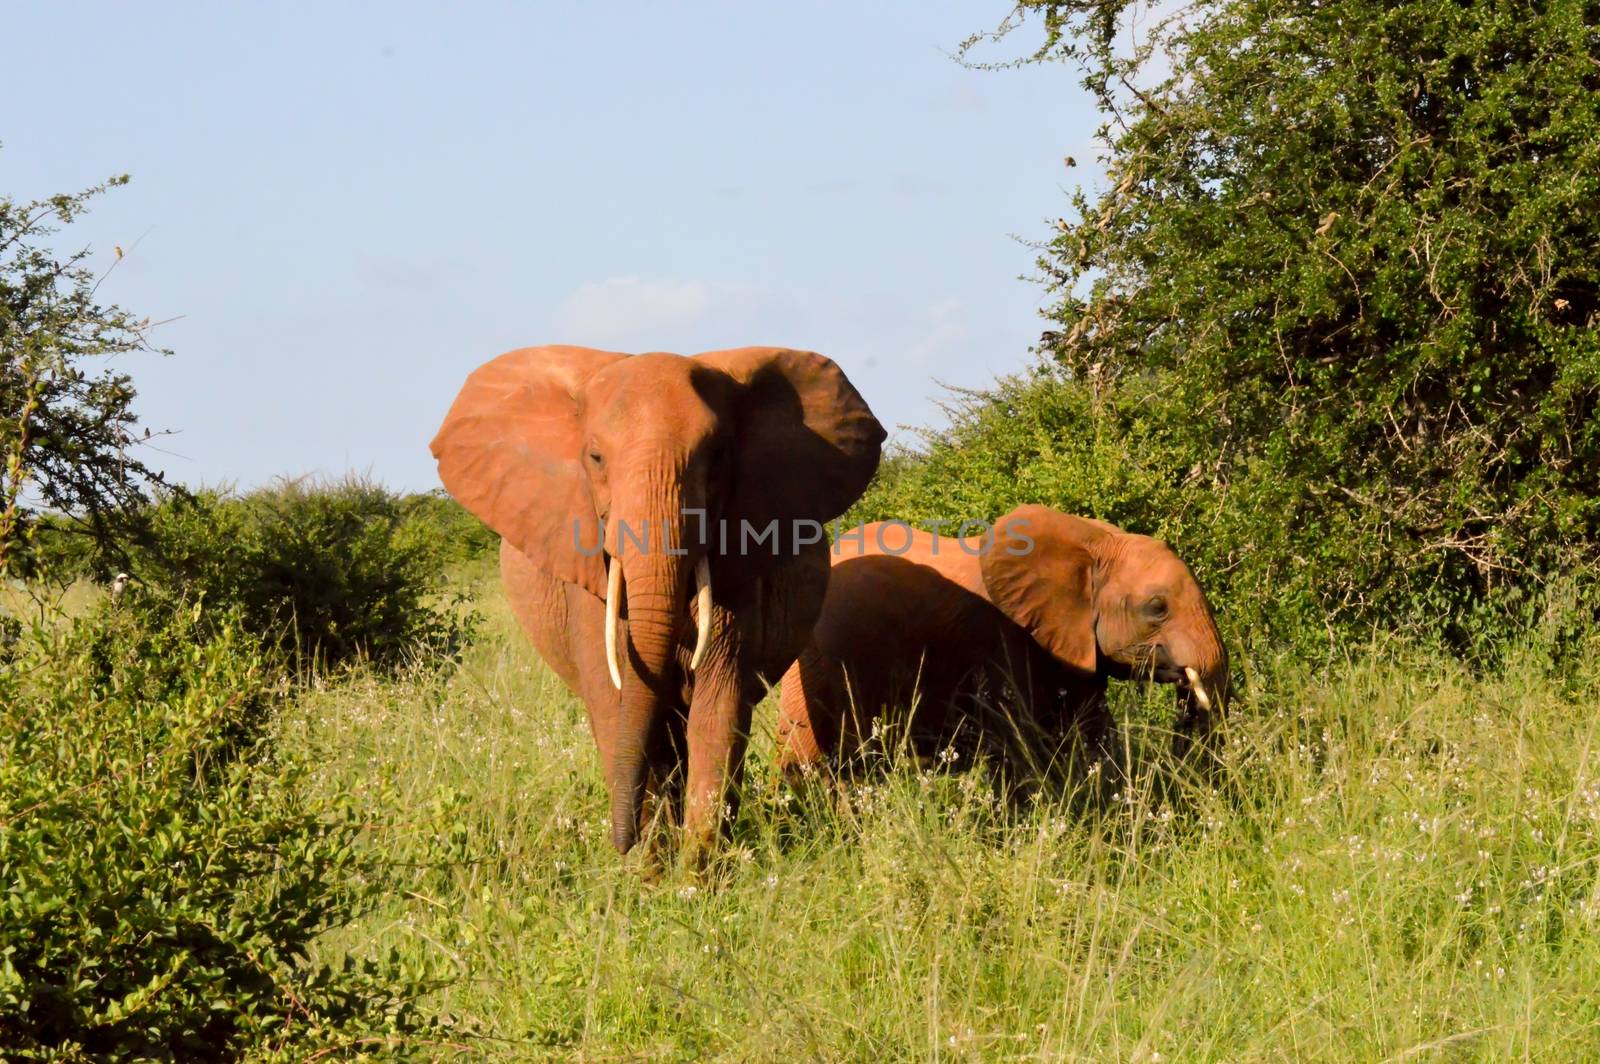 Kenya Red Elephant by Philou1000